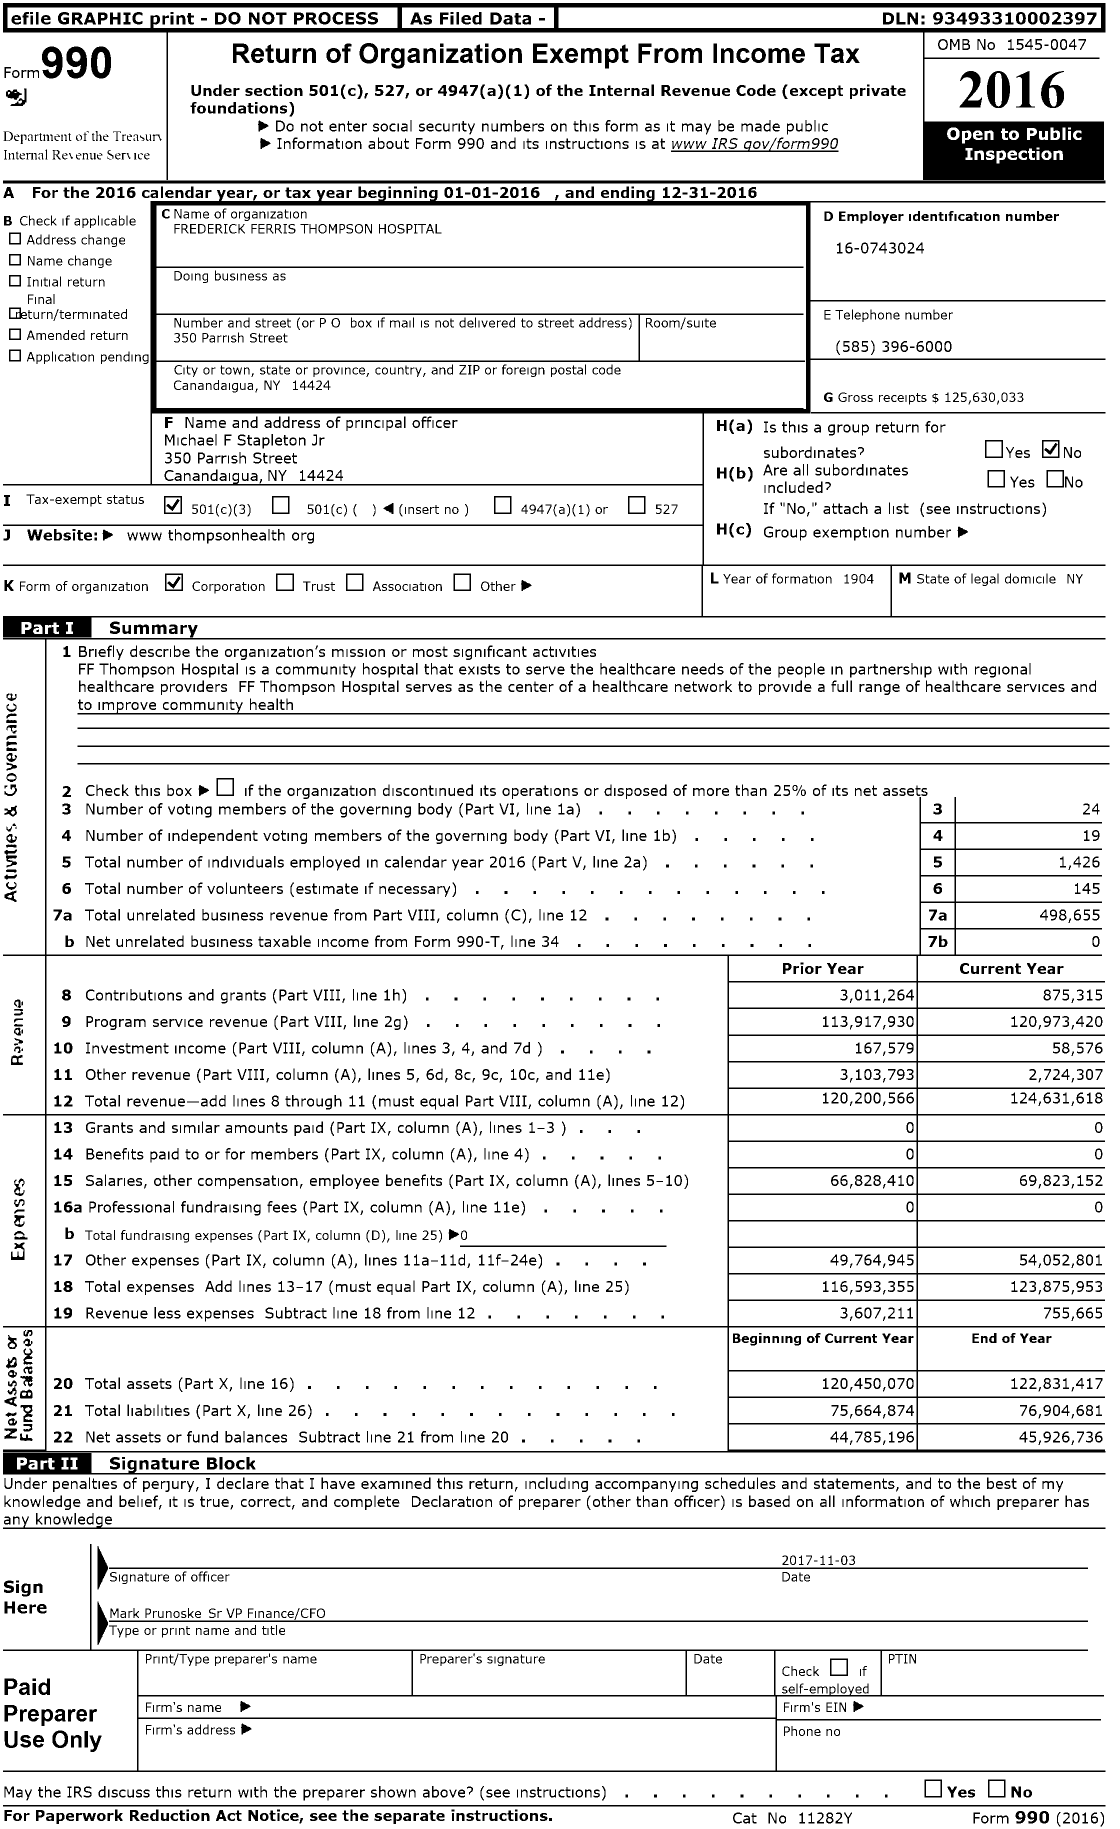 Image of first page of 2016 Form 990 for The Frederick Ferris Thompson Hospital